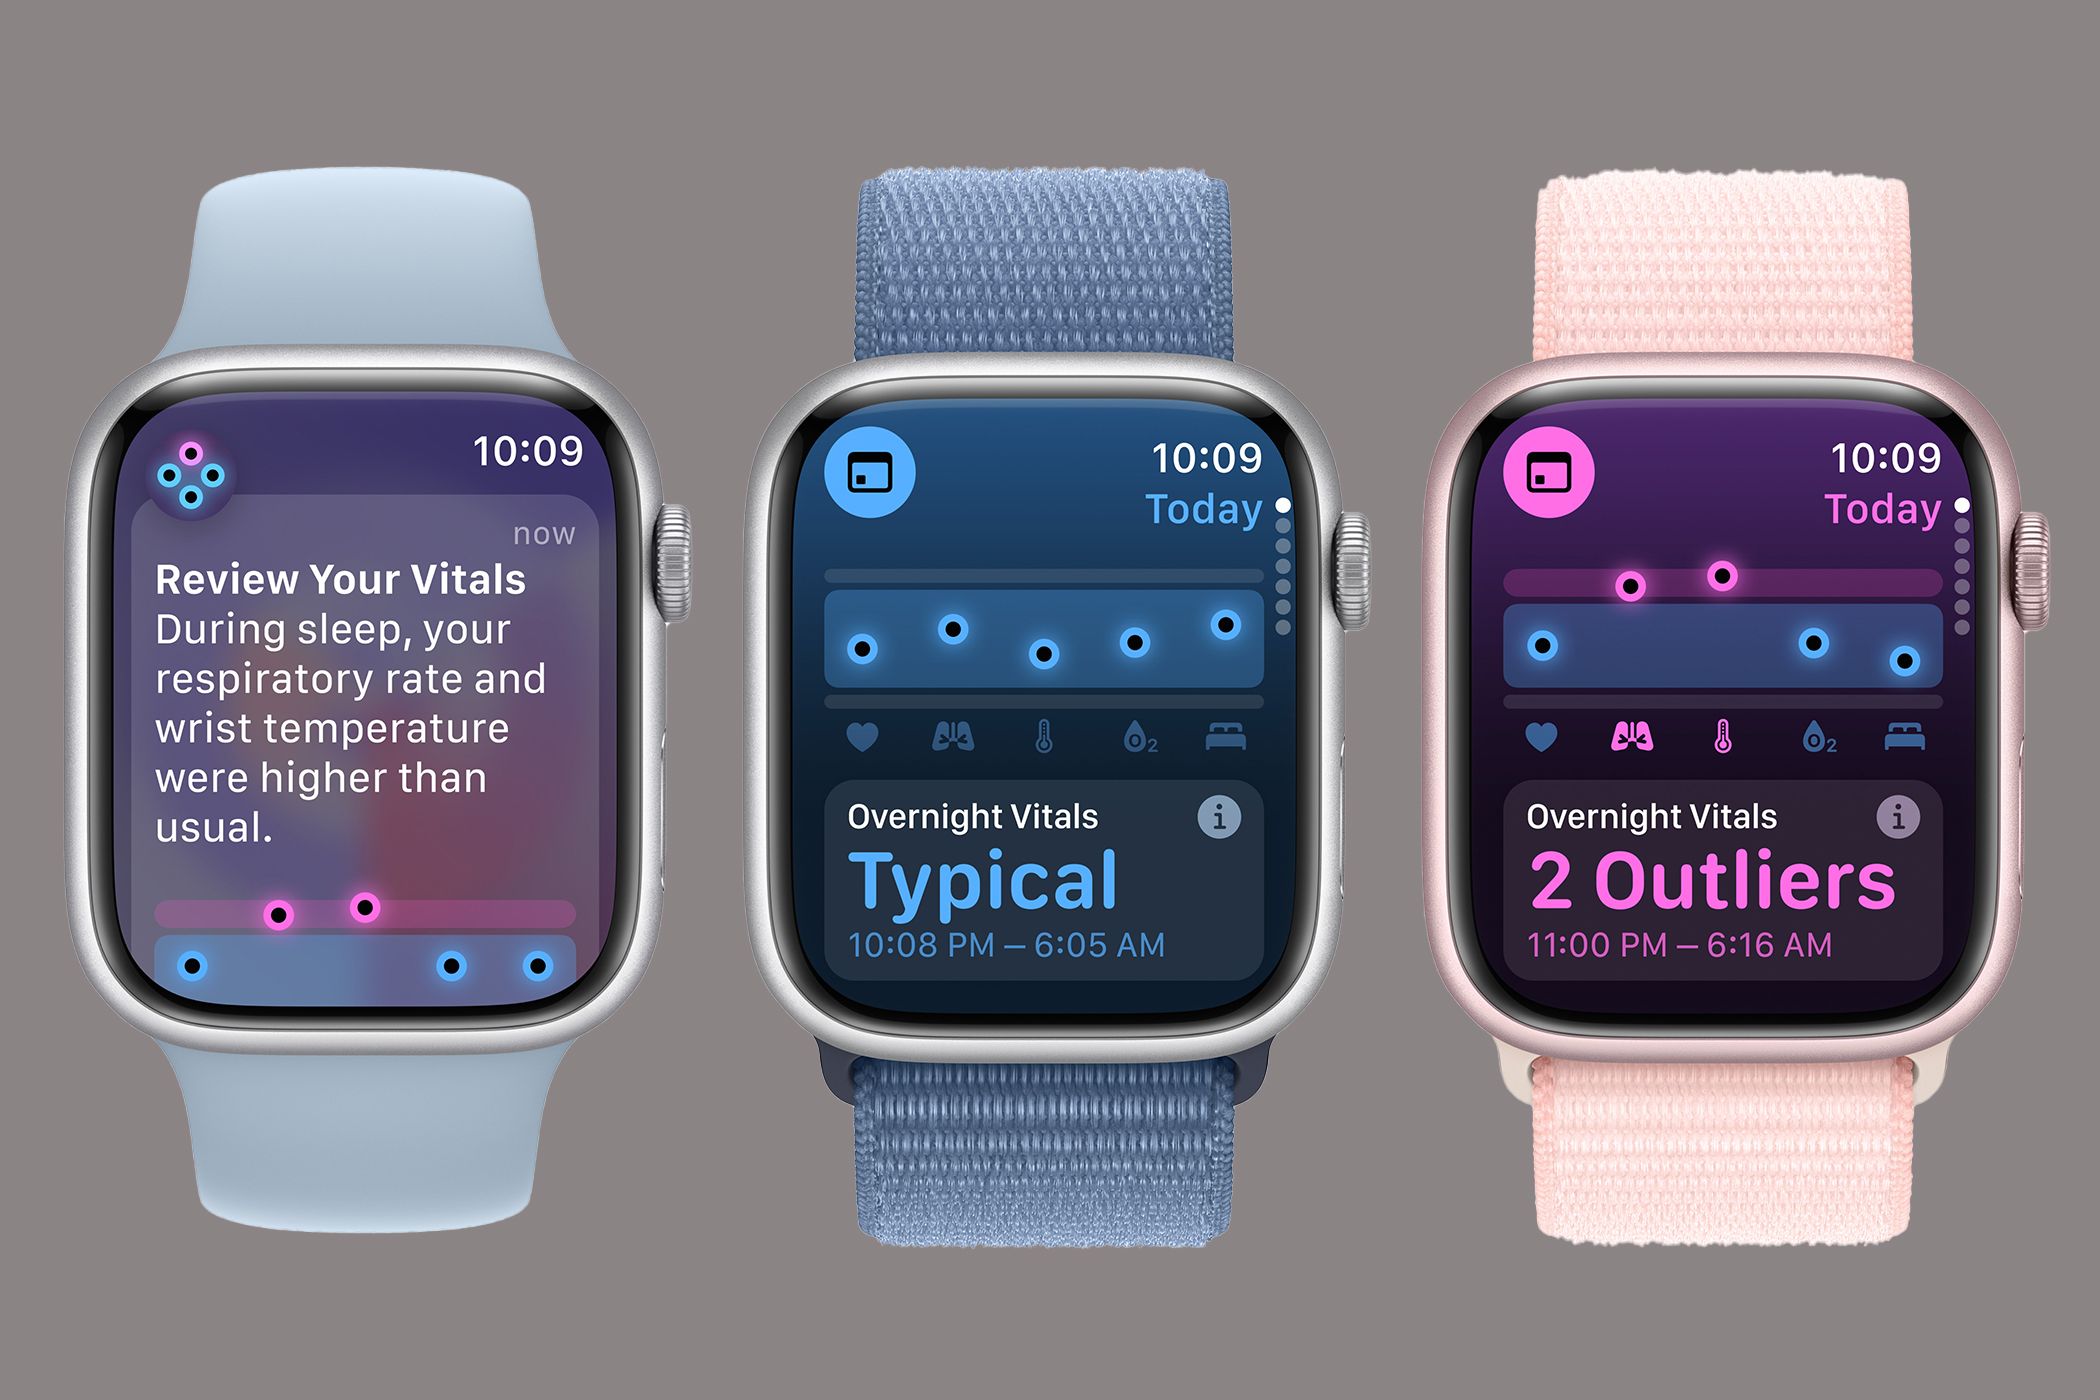 Three Apple Watches on a grey background showing the new Vitals app screens